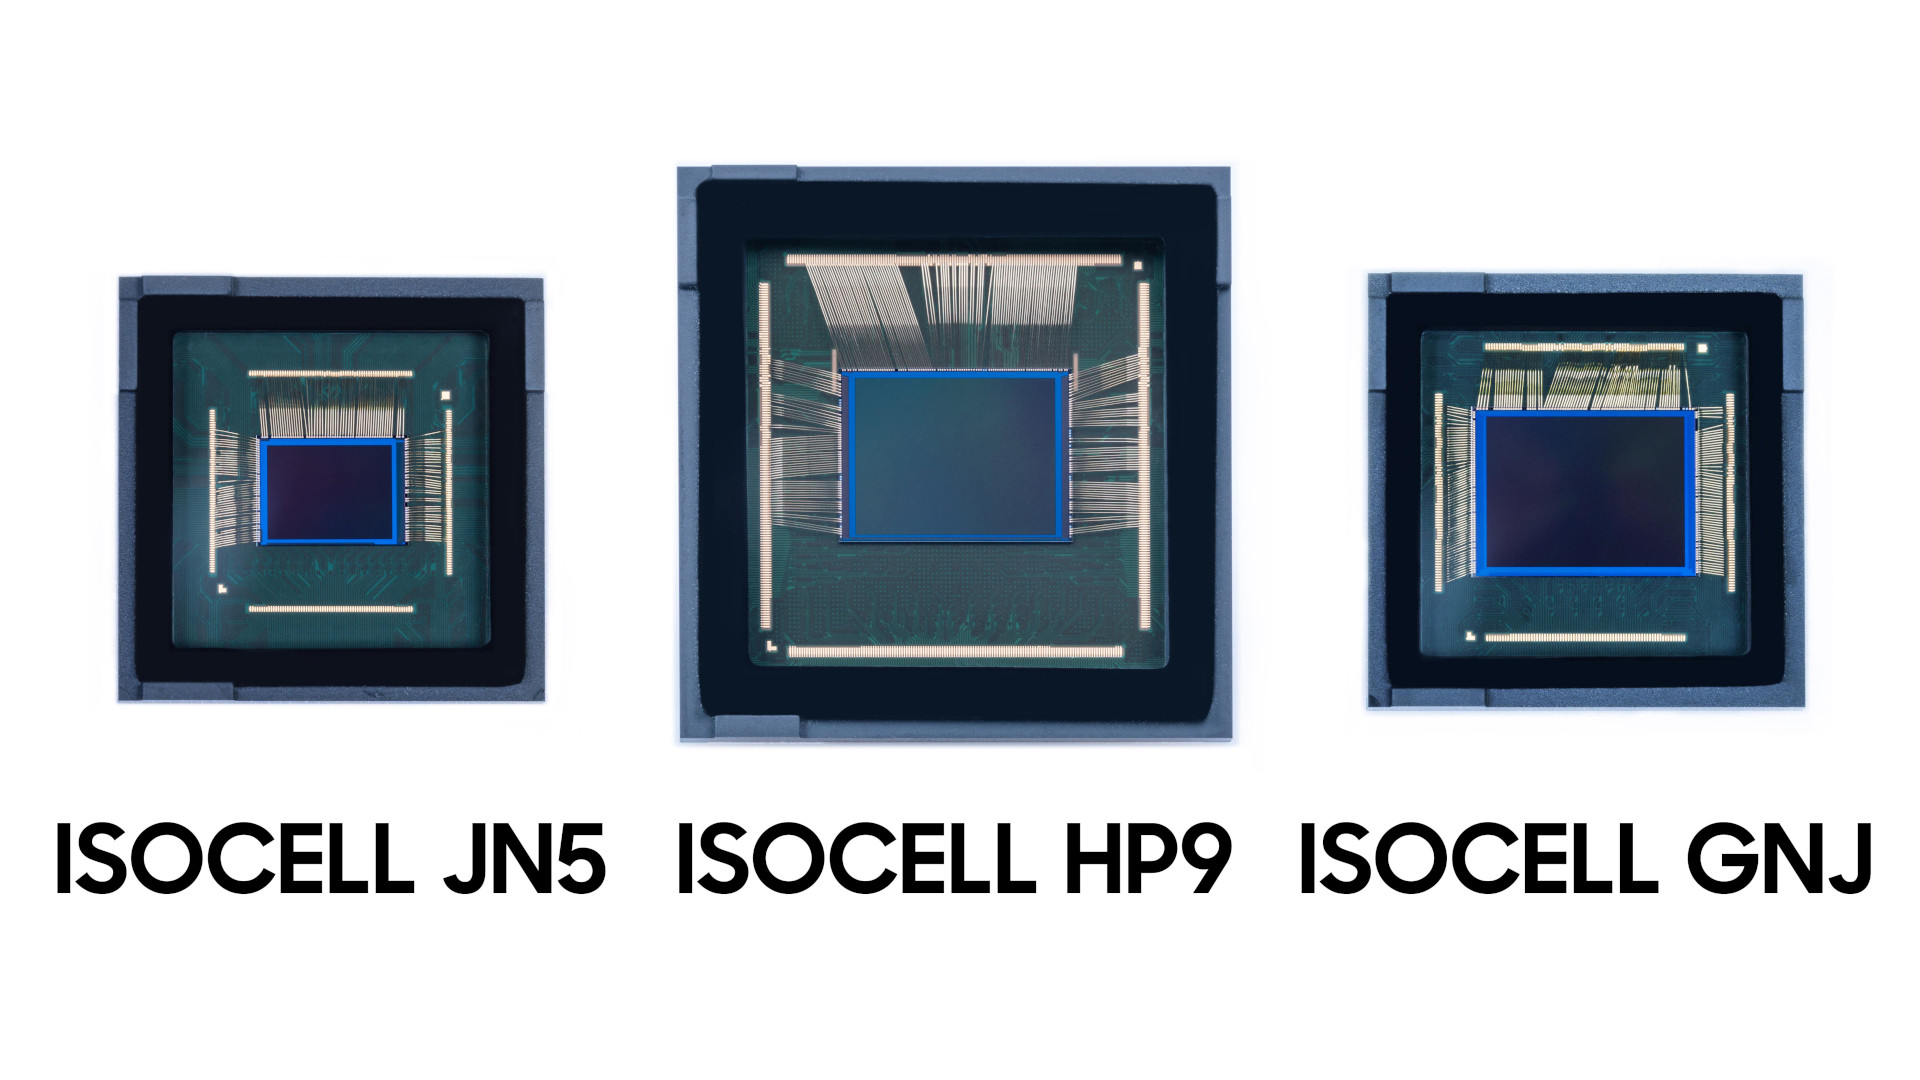 The Samsung ISOCELL GNJ, ISOCELL HP9, and ISOCELL JN5.